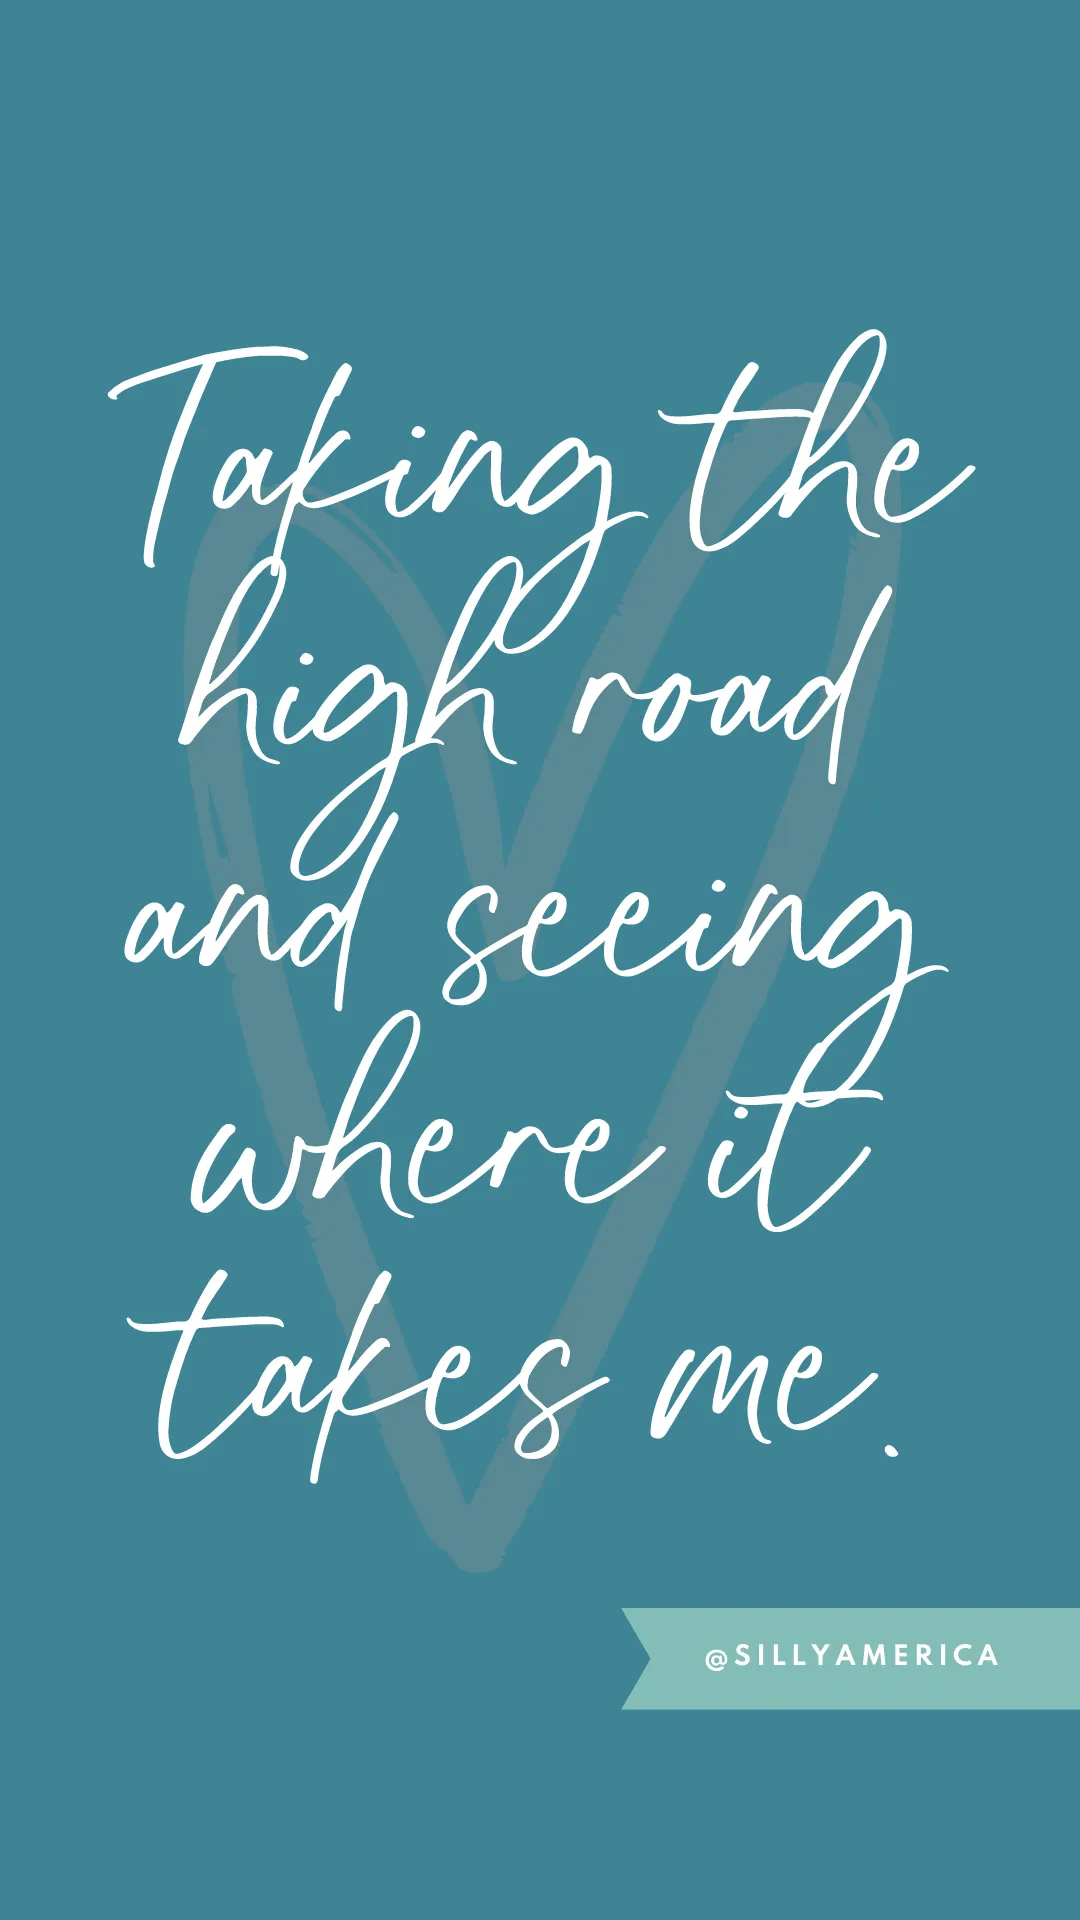 Taking the high road and seeing where it takes me. - Road Trip Captions for Instagram